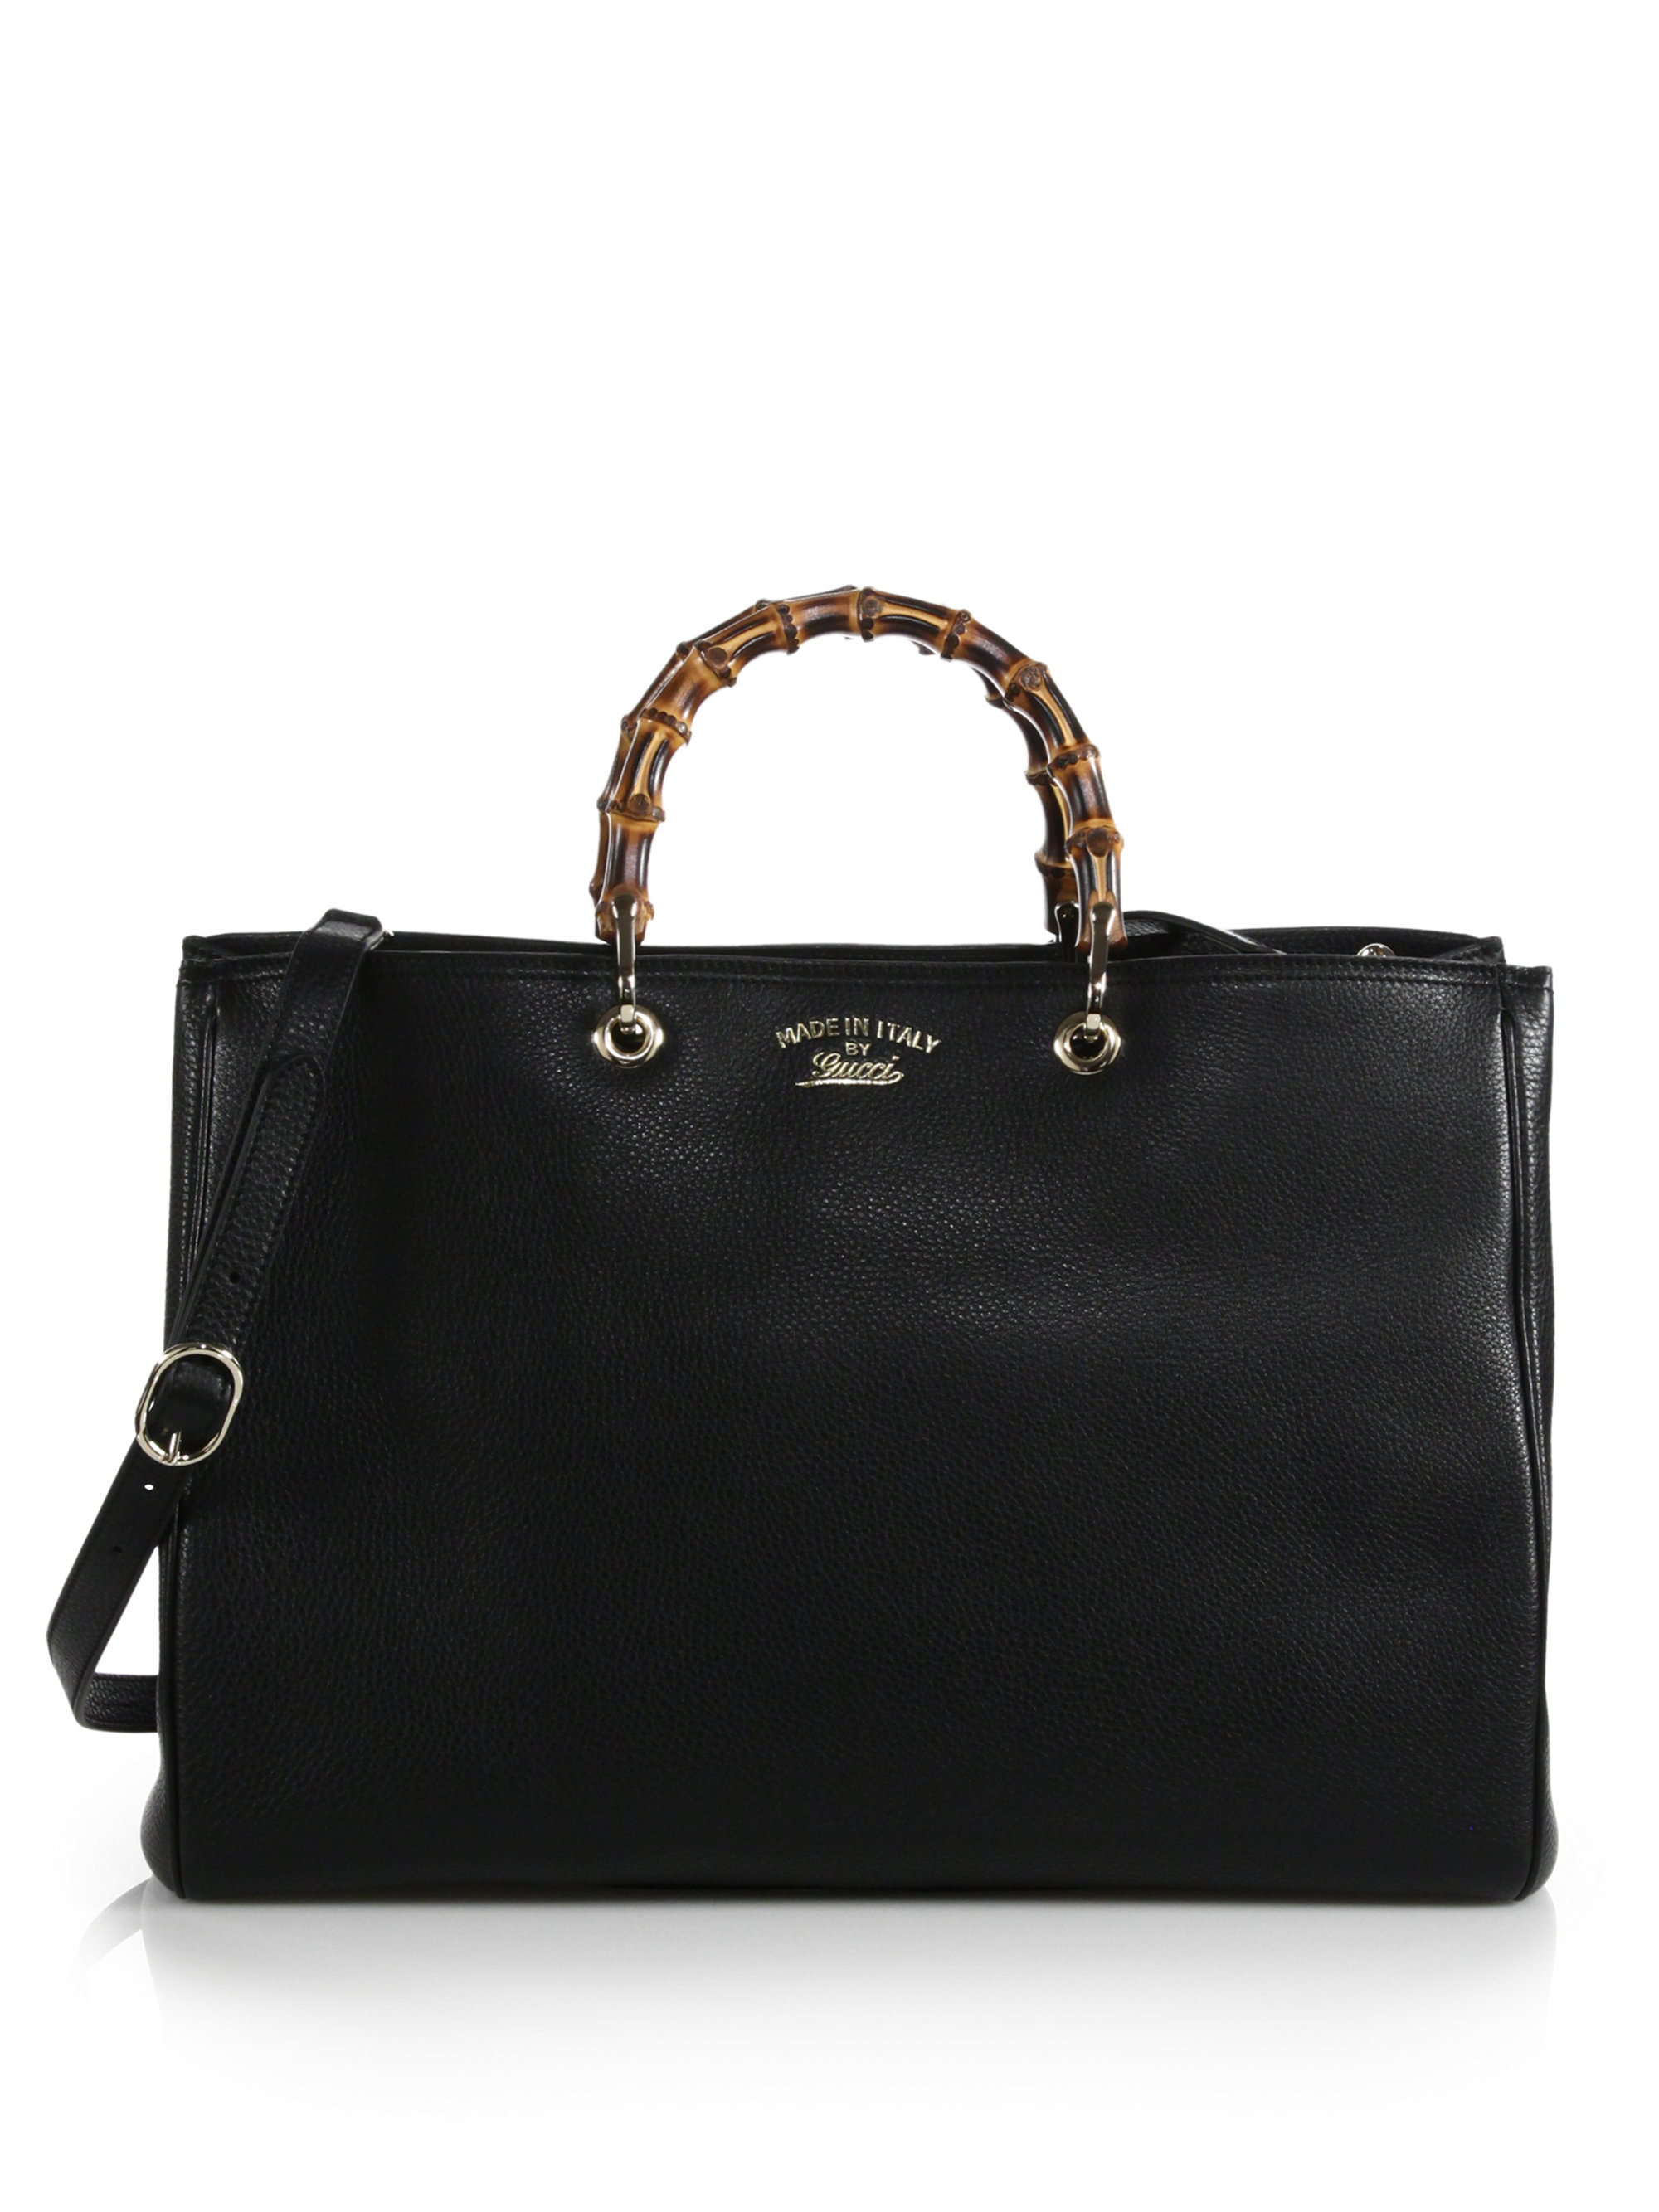 Gucci Bamboo Shopper Large Leather Tote in Black | Lyst